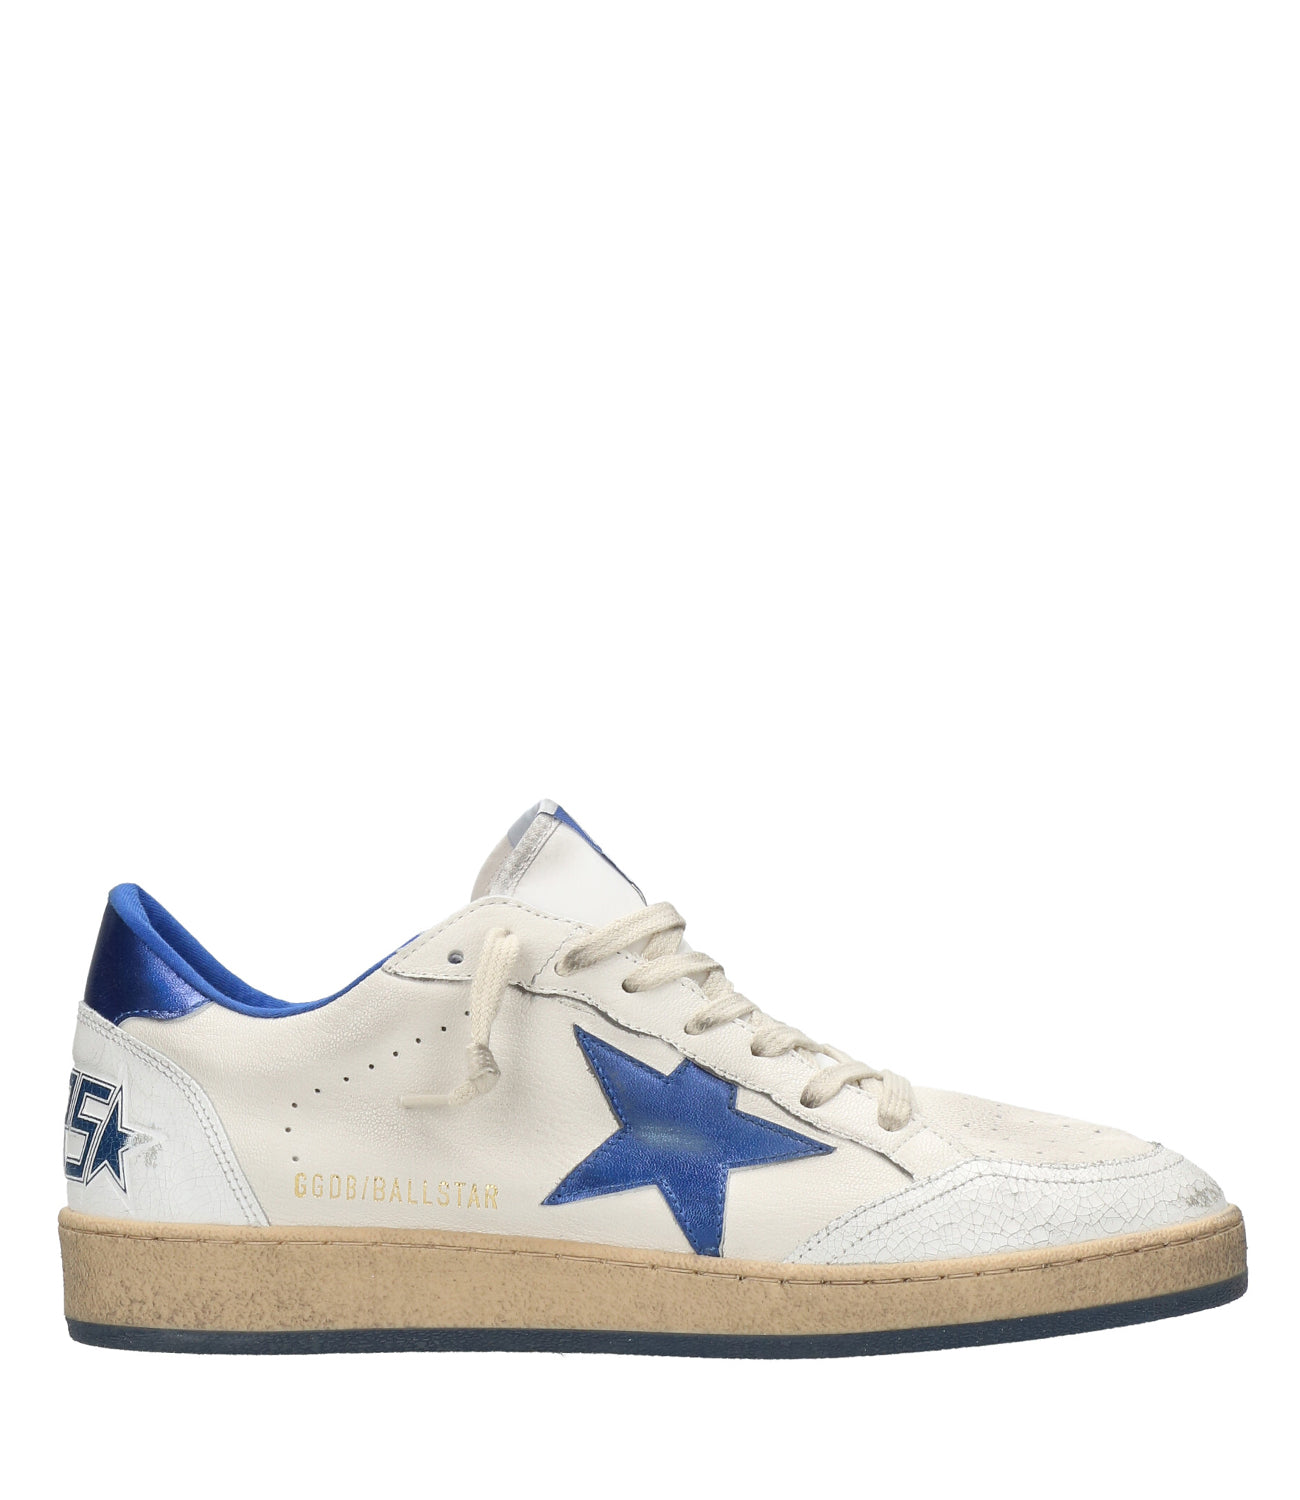 Golden Goose | Ball Star Sneakers White and Blue